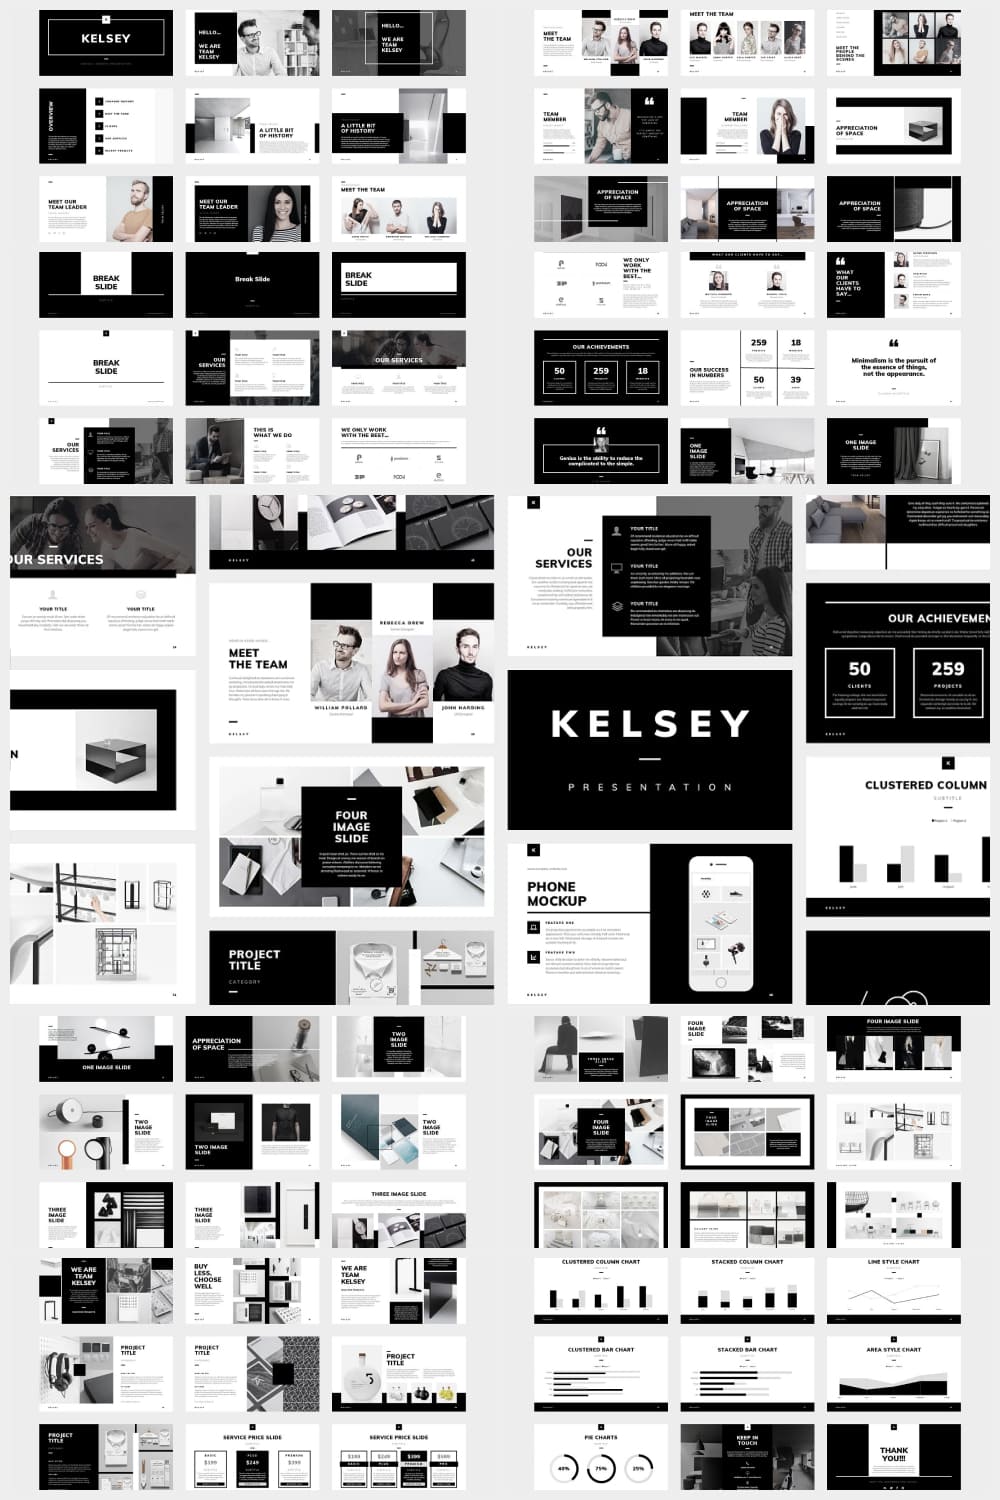 PowerPoint – Kelsey Presentation Collage image.